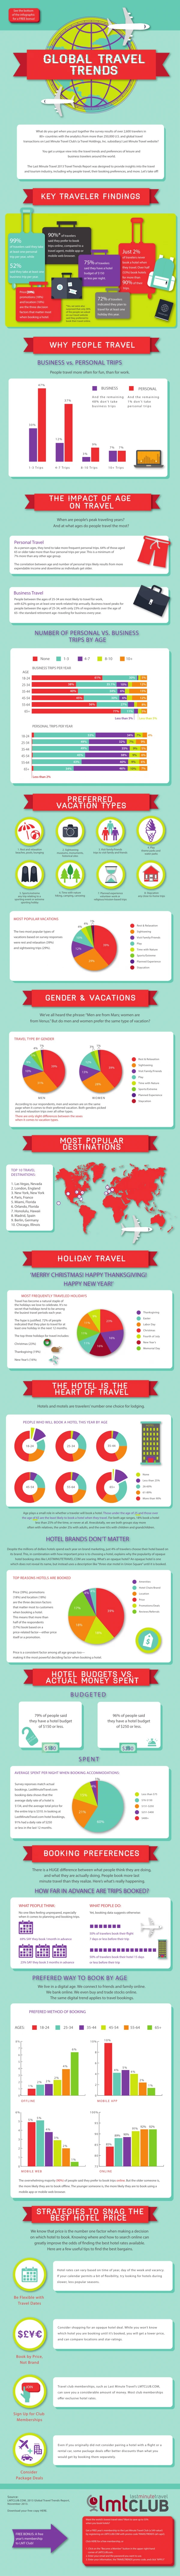 Global Travel Trends Infographic